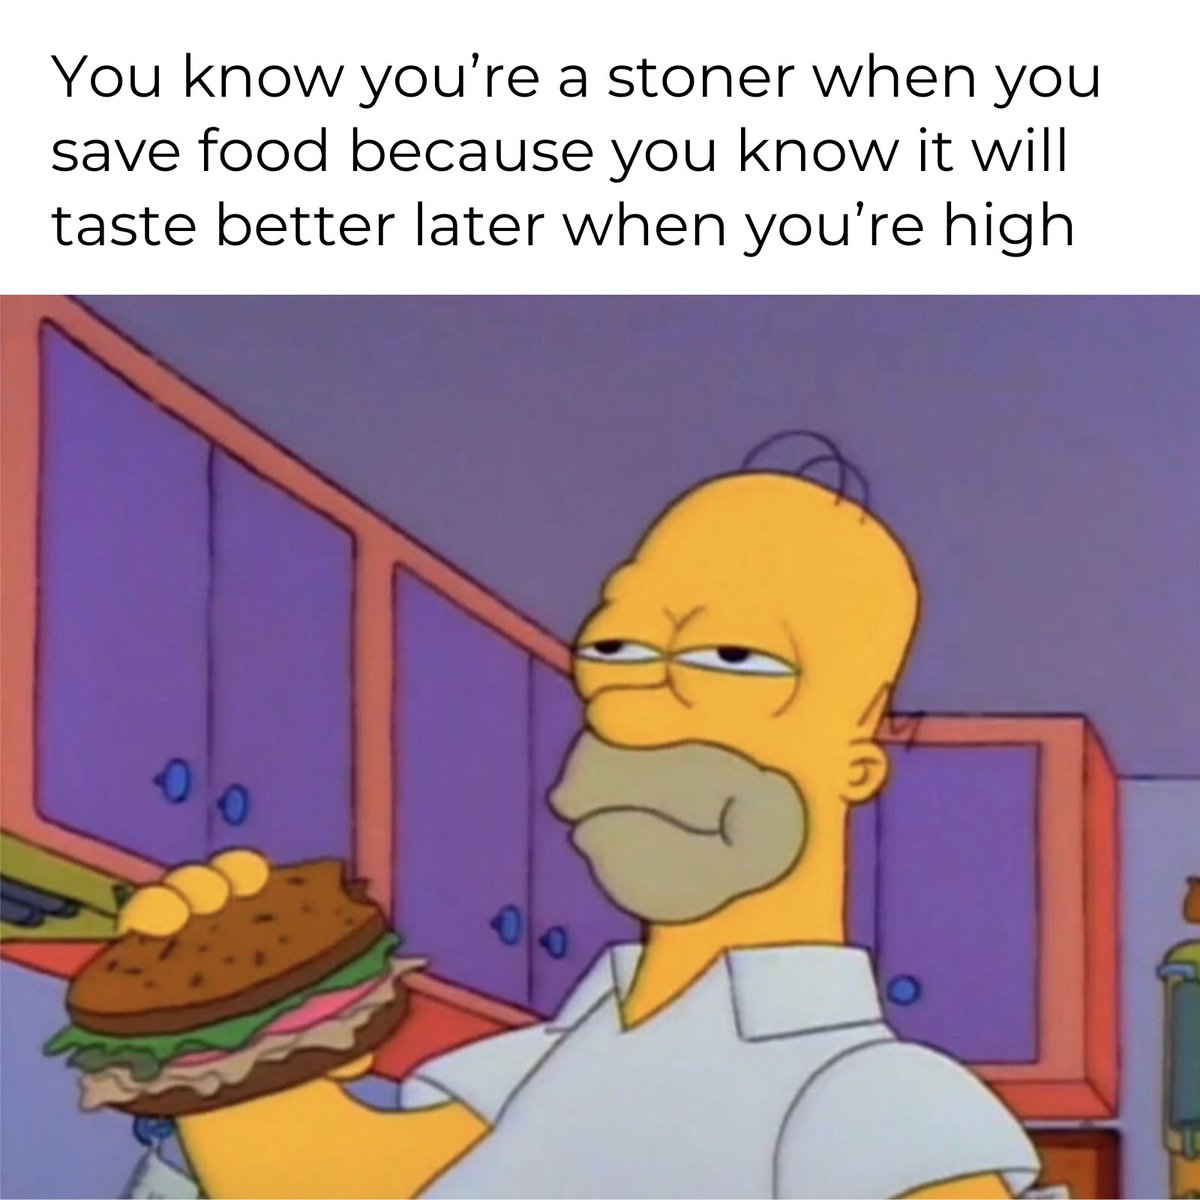 100x better for sure!

-----

#stoner #memes #ouid #funnymemes #foodie #highfood #hightime #maryjane #legalize #smoker #betterfood